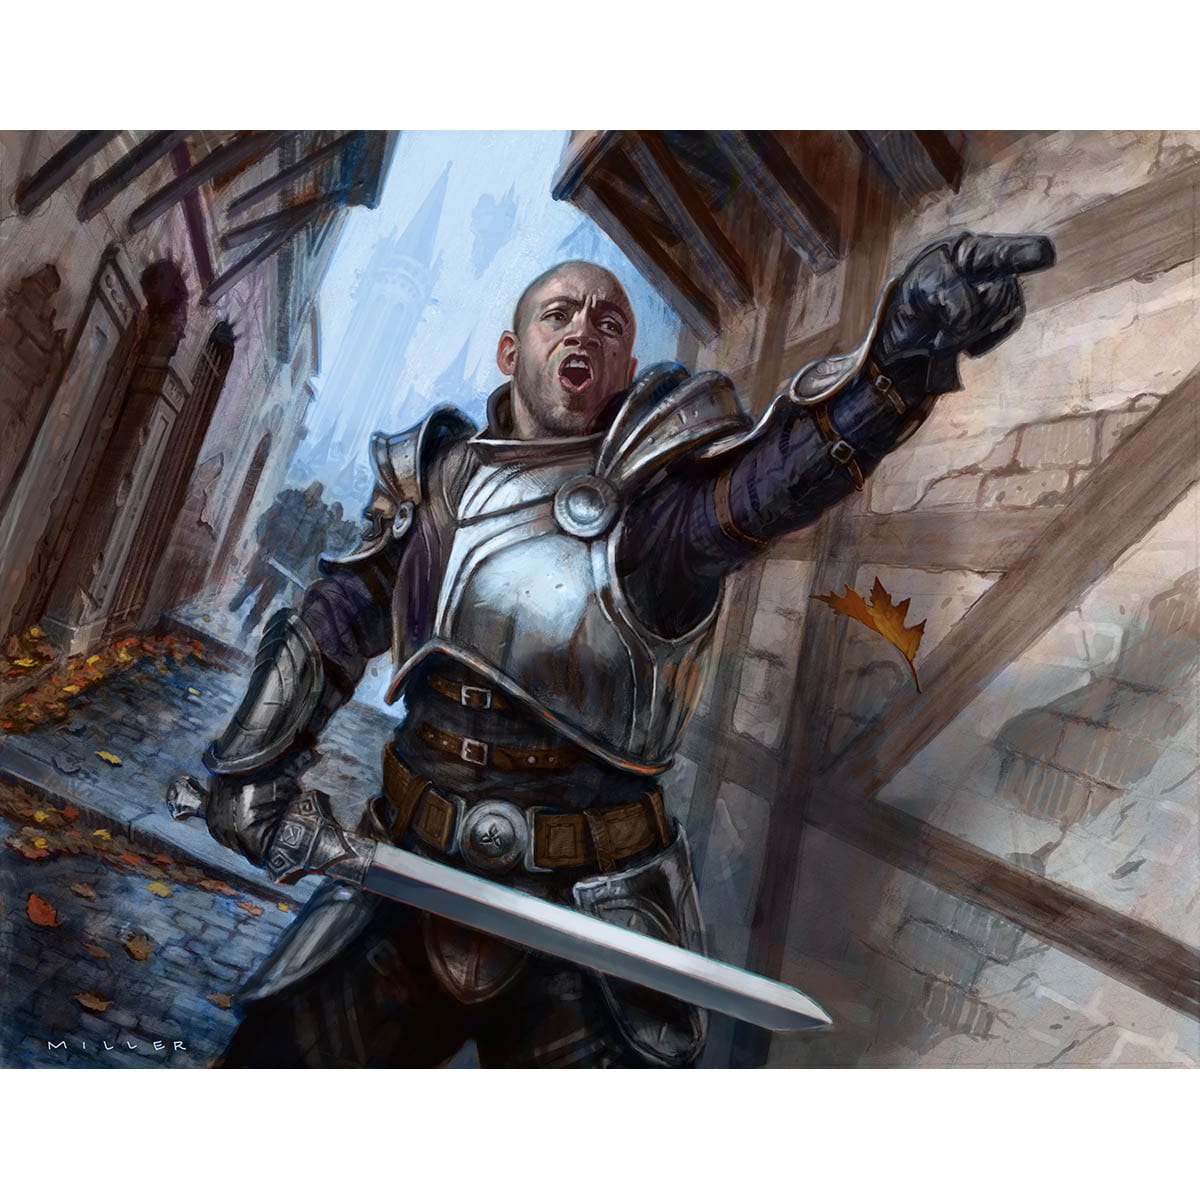 Haazda Officer Print - Print - Original Magic Art - Accessories for Magic the Gathering and other card games